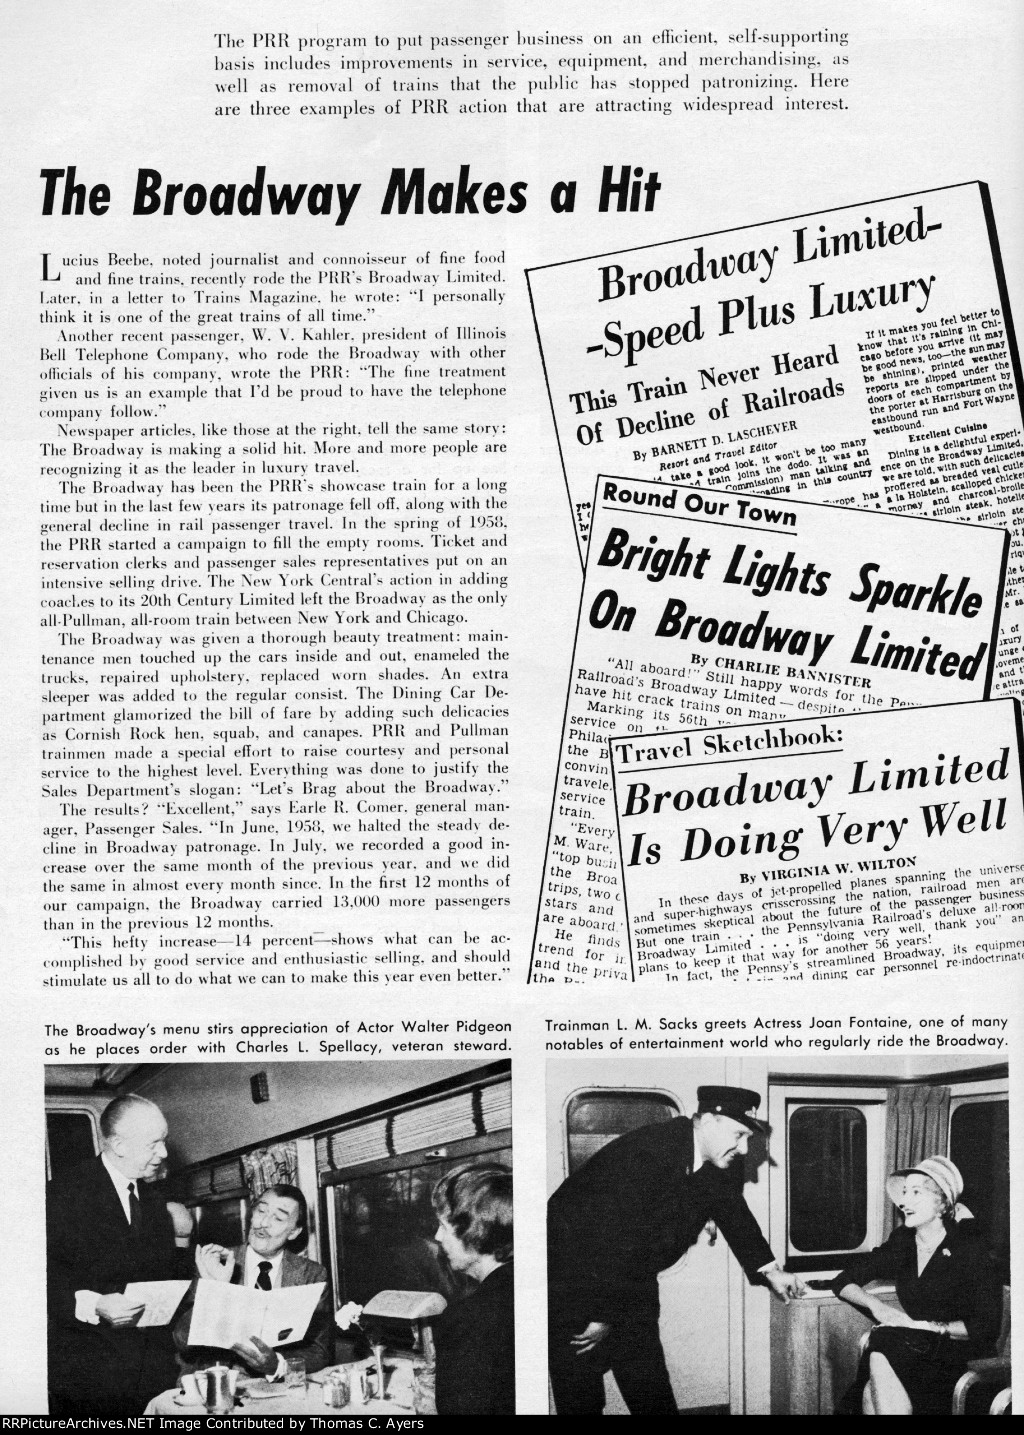 "The Broadway Makes A Hit," Page 10, 1959